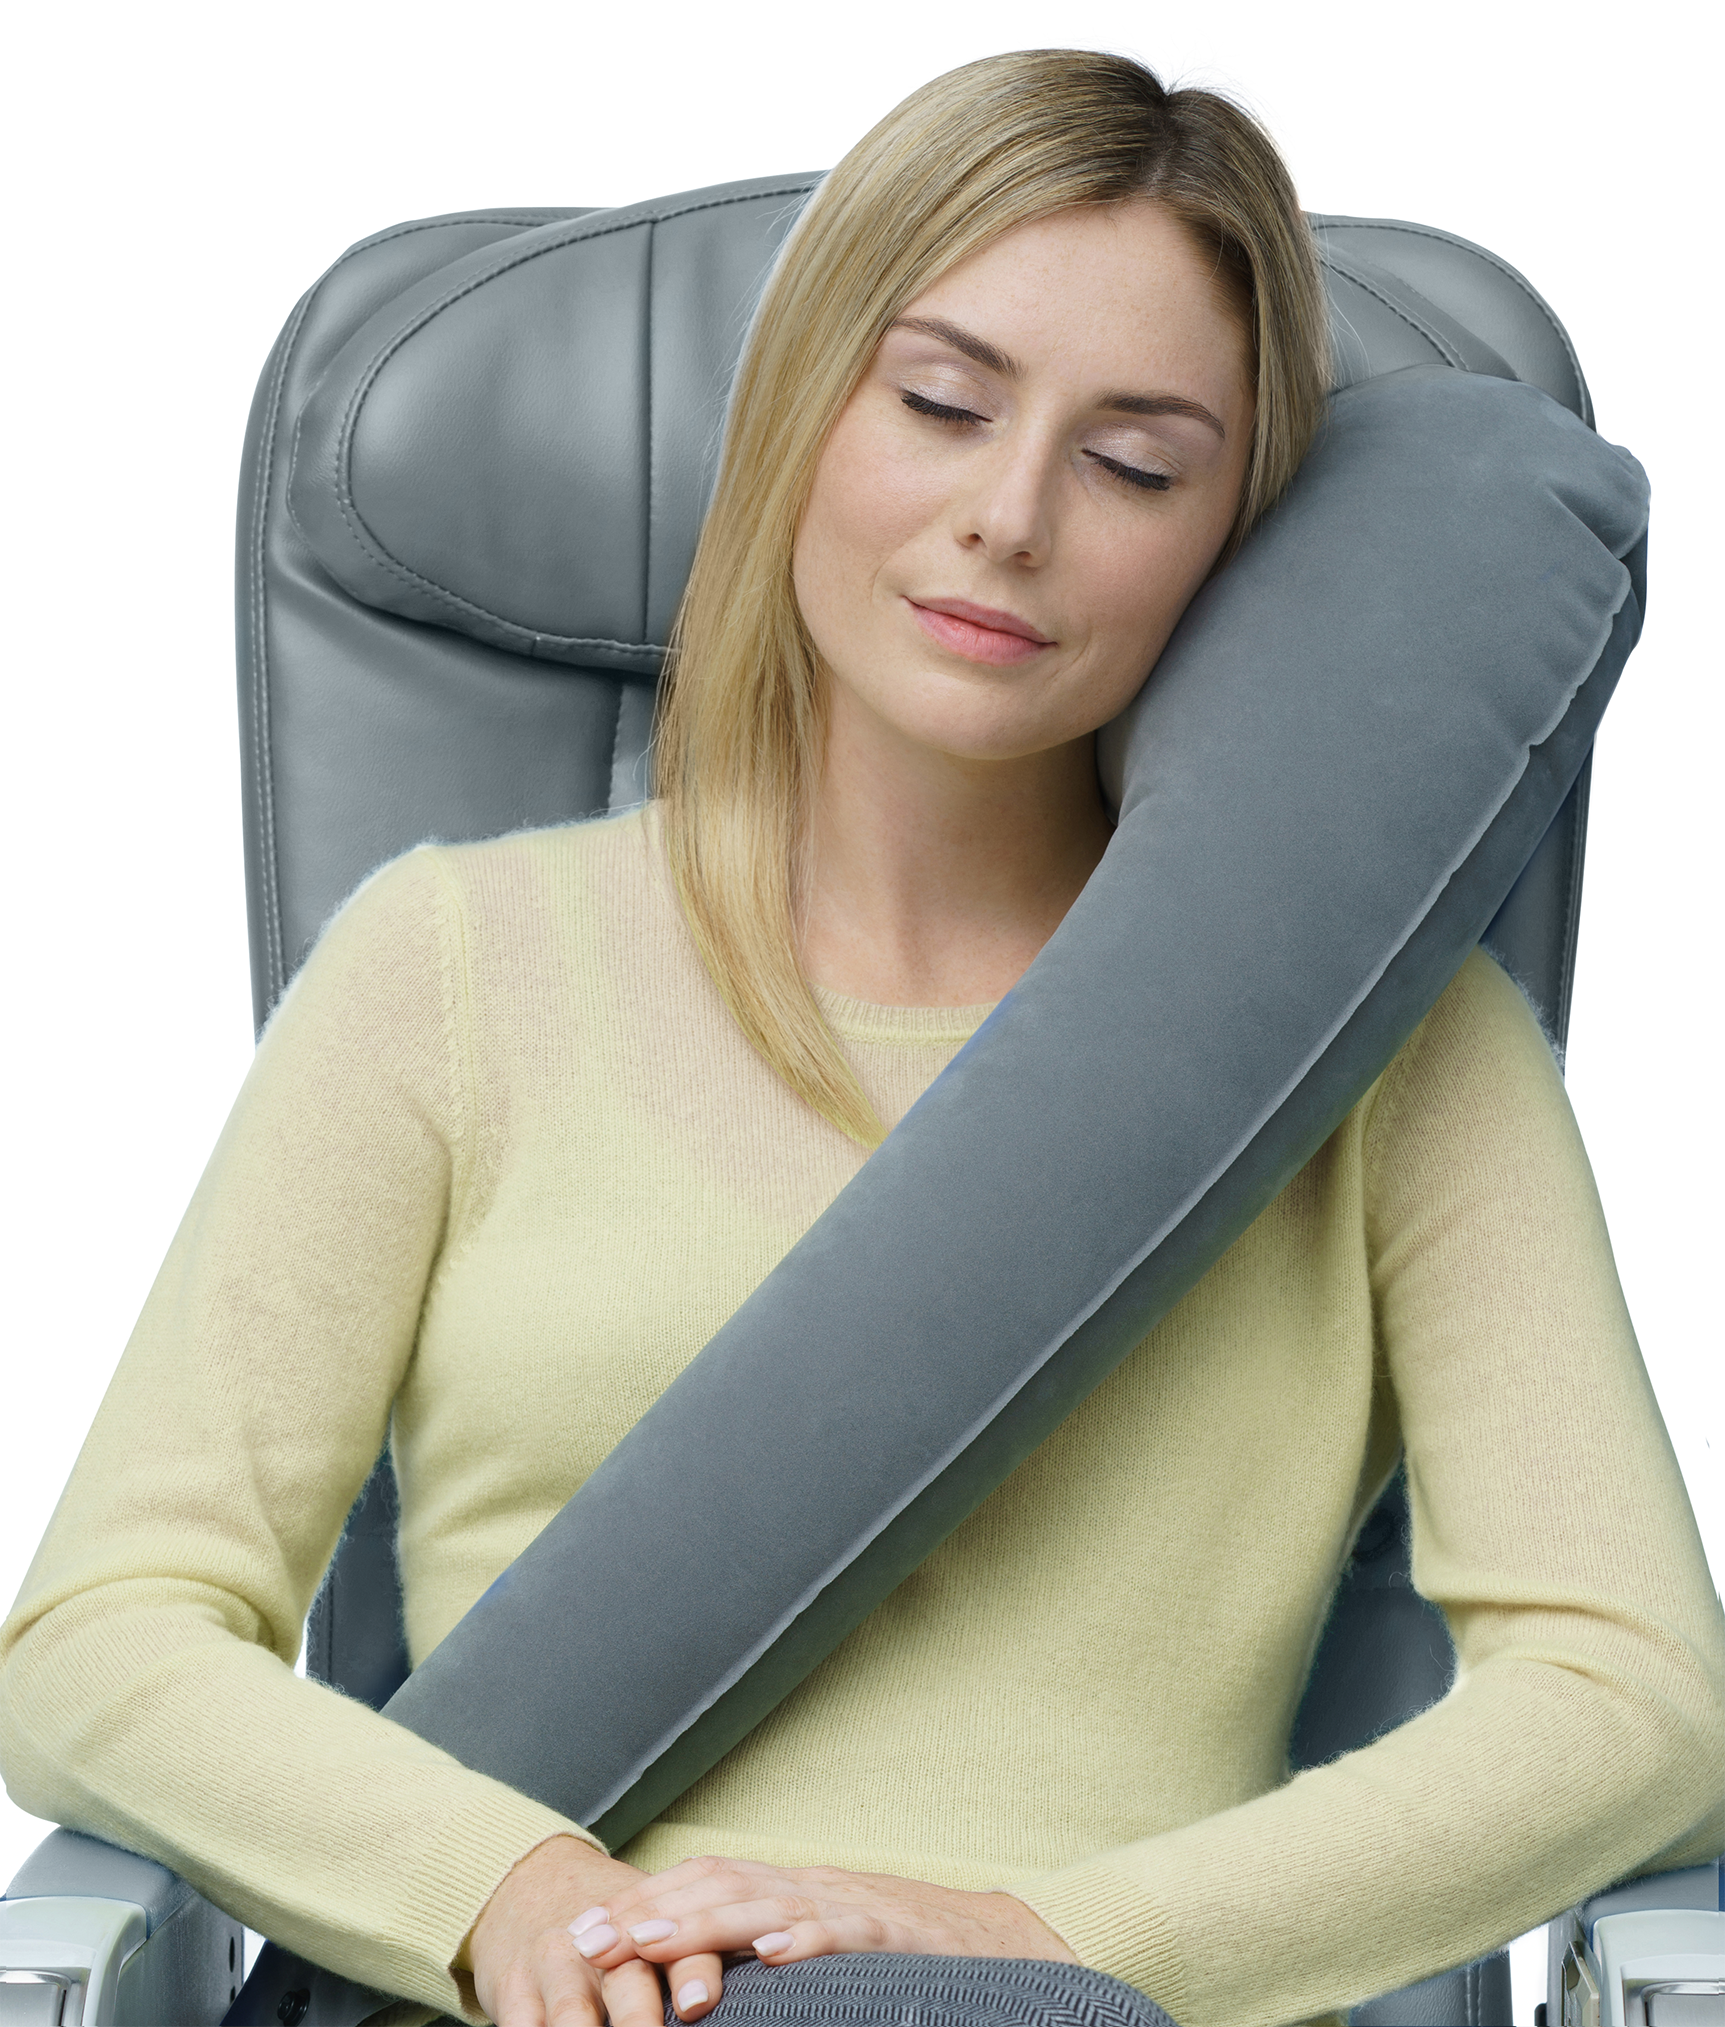 Skyrest Inflatable Travel Pillow - Airplane Pillow for Neck Support on Long  Flights, Buses, Cars, Office & Trains - Comes with Eye Mask, Earplugs 